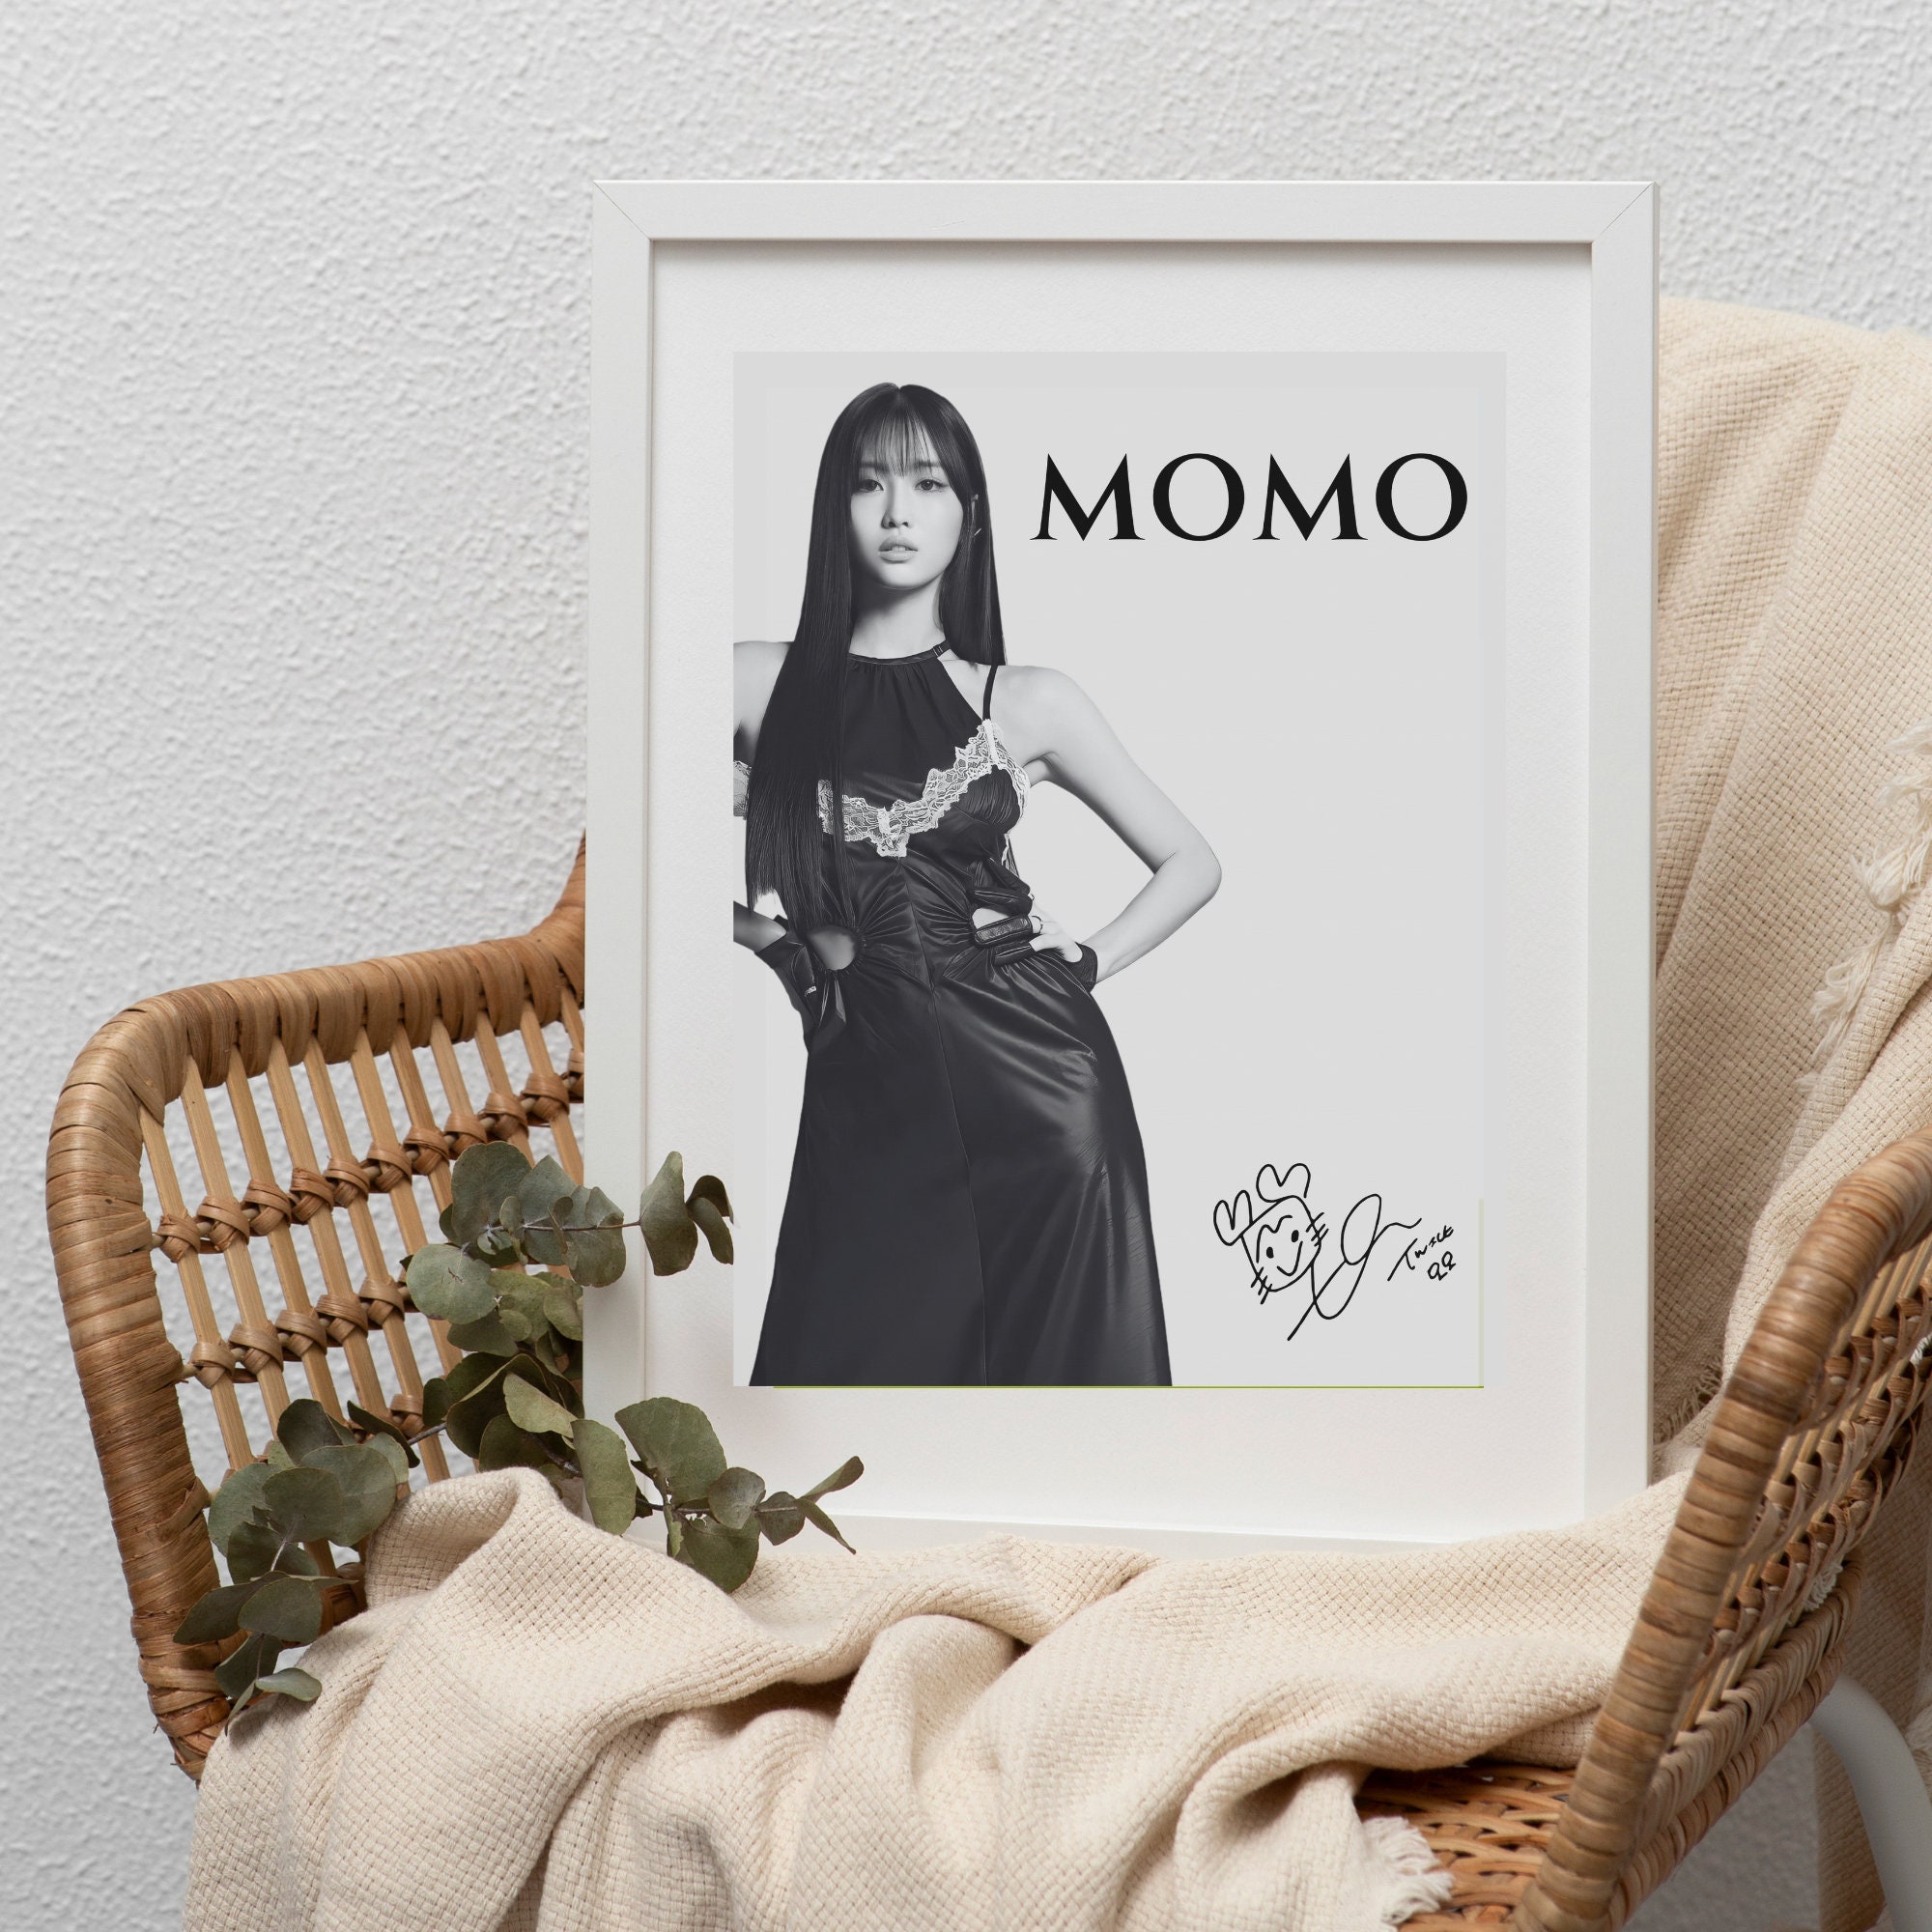  Korean Singer Momo Hirai Twice K-pop Girl Group Band Sexy  Canvas Poster (20) Canvas Art Poster And Wall Art Picture Print Modern  Family Bedroom Decor Posters 12x18inch(30x45cm) : לבית ולמטבח